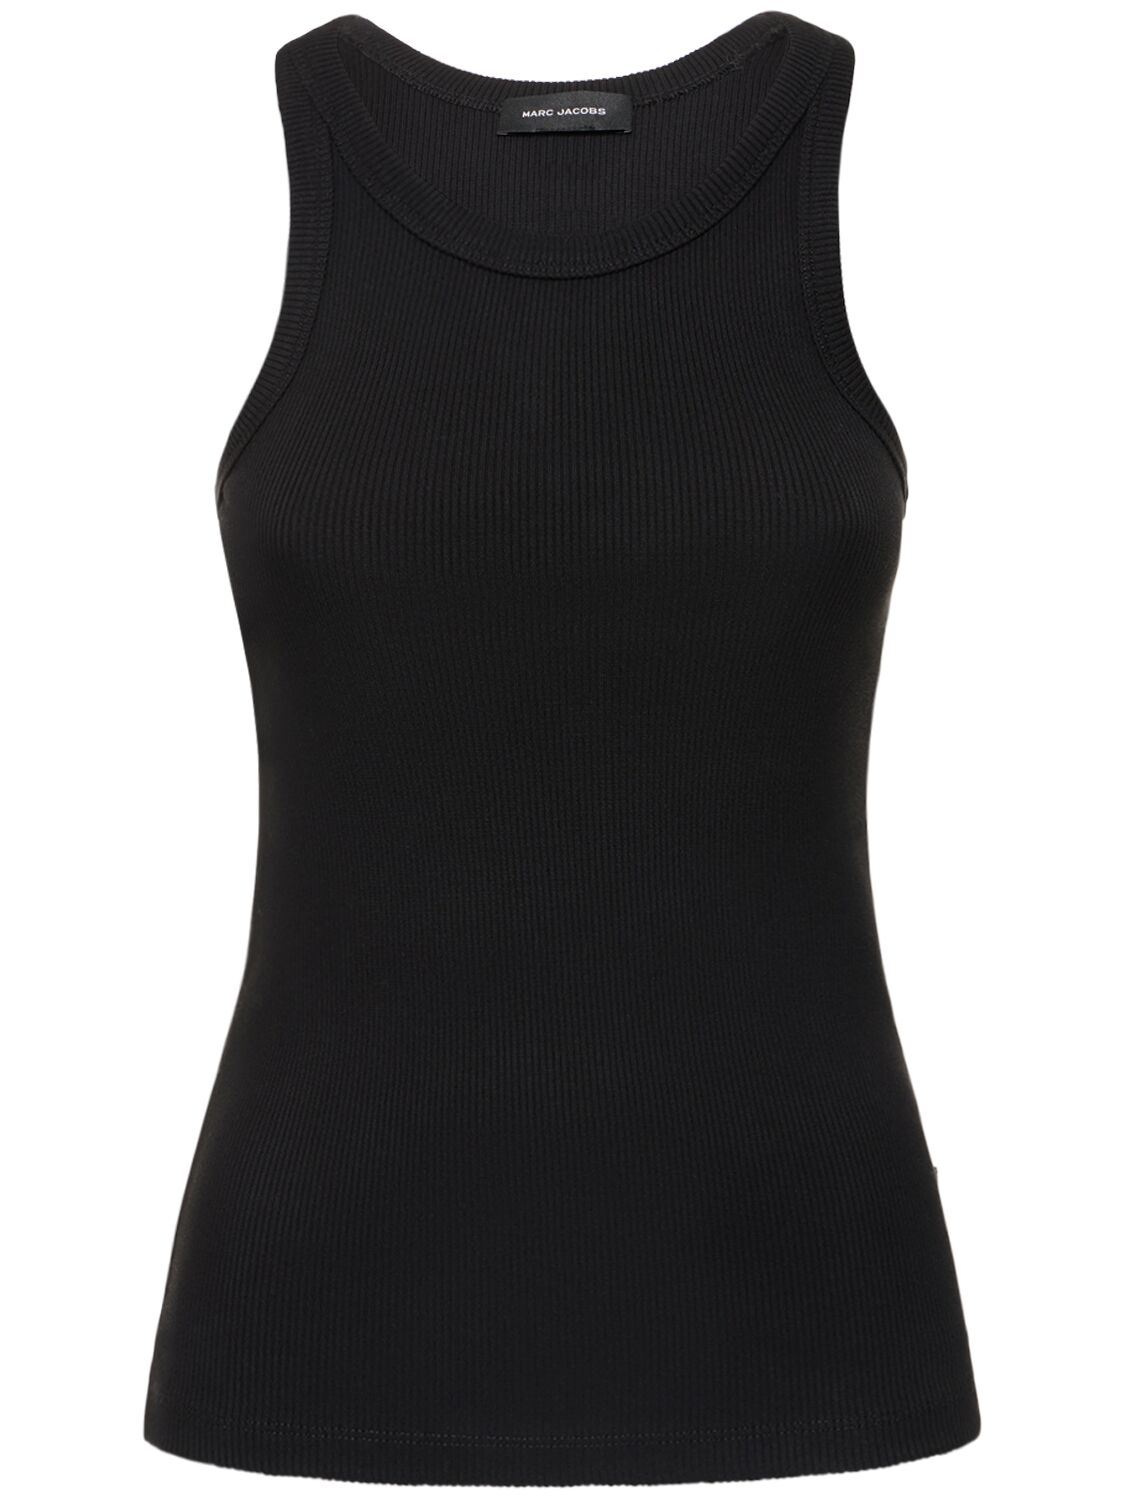 MARC JACOBS THE MONOGRAM RIBBED TANK TOP